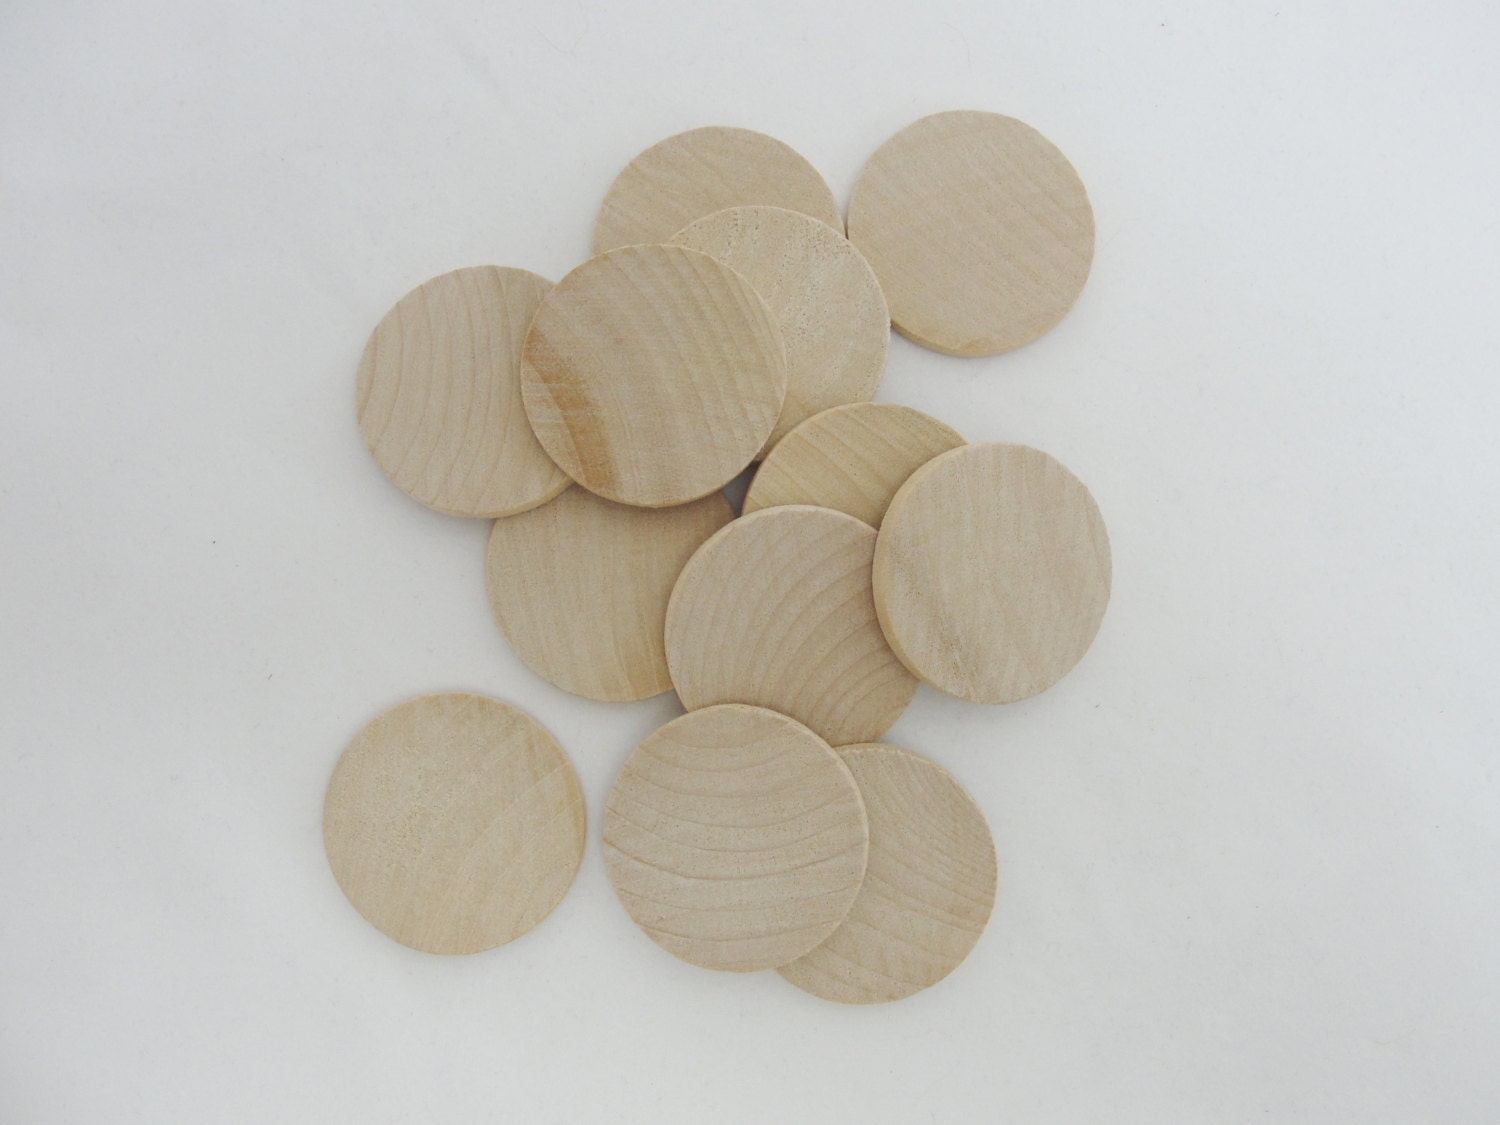 ilauke 14 Inch Wood Circles for Crafts, 4Pcs Blank Wooden Rounds Discs, 1/4  Inch Thick Wood Rounds for Crafts, Door Hangers, Wood Signs, Painting